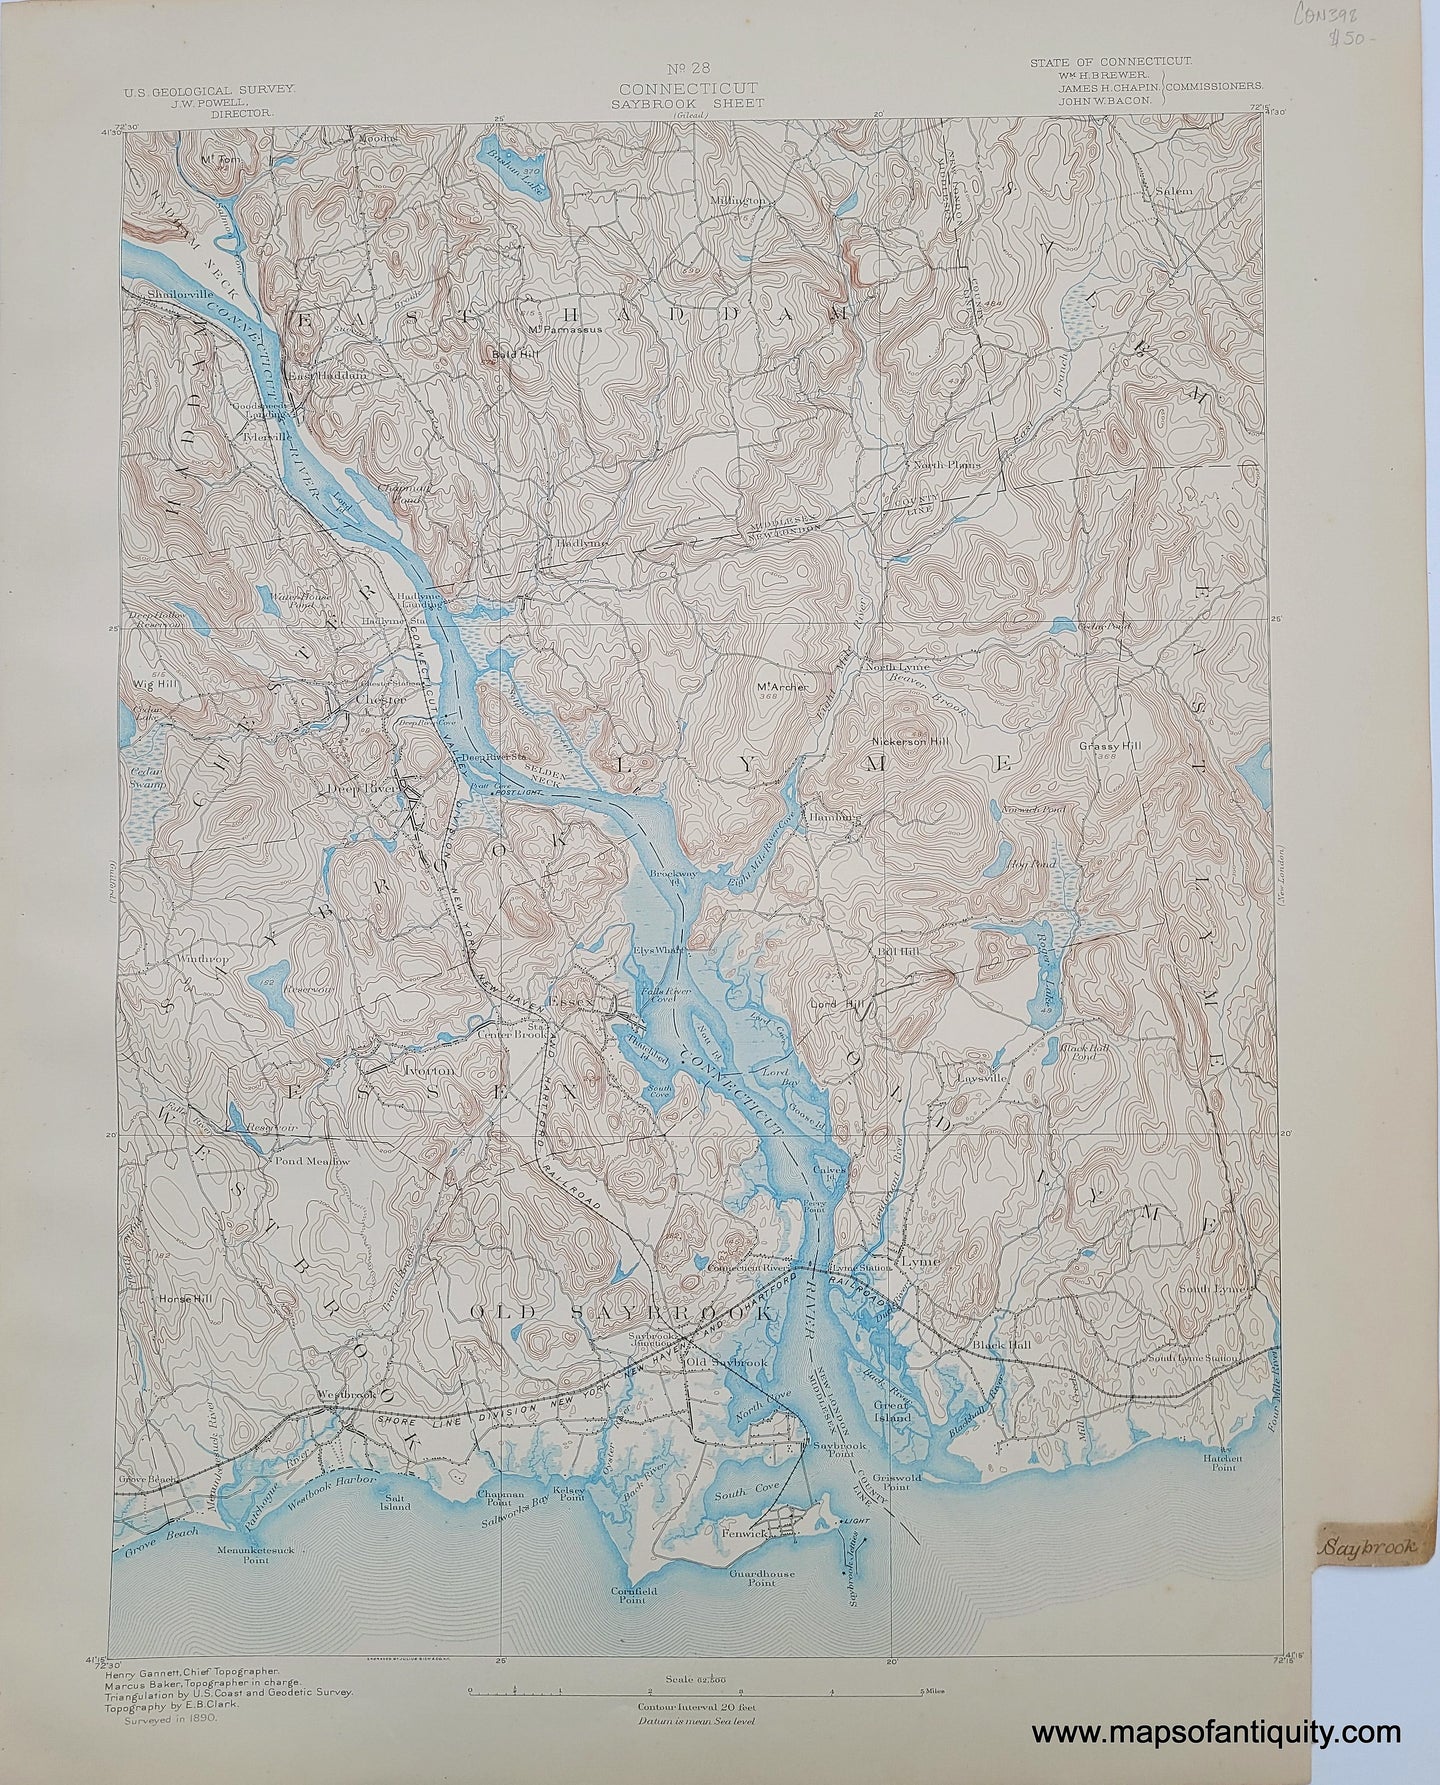 Antique-Topographical-Map-Topography-Connecticut-CT-Saybrook-Sheet-USGS-United-States-Geological-Survey-Maps-of-Antiquity